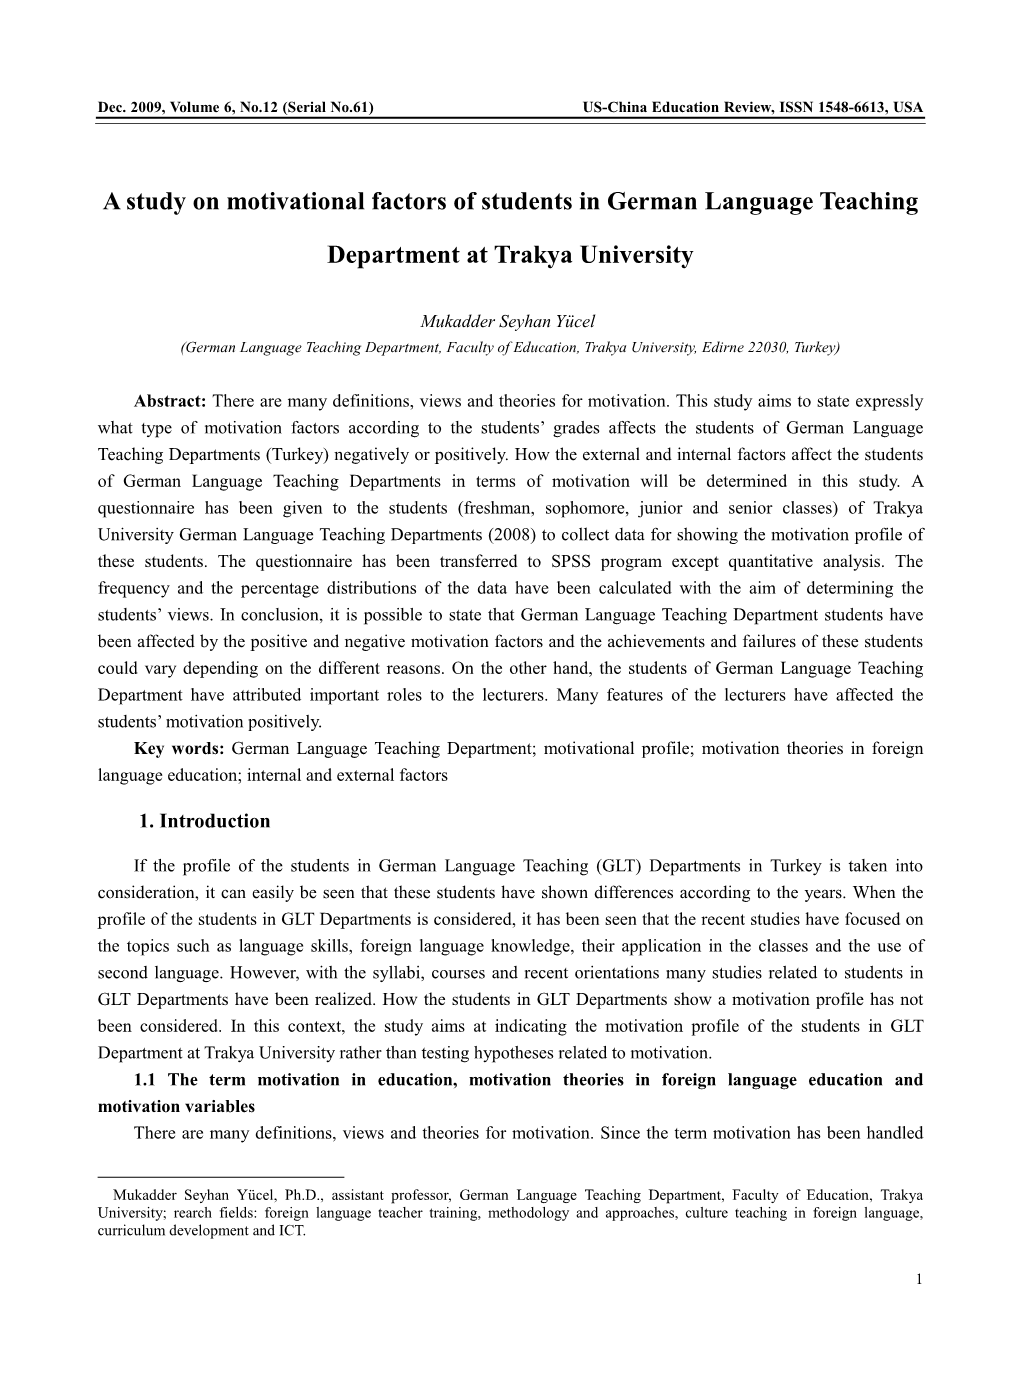 A Study on Motivational Factors of Students in German Language Teaching